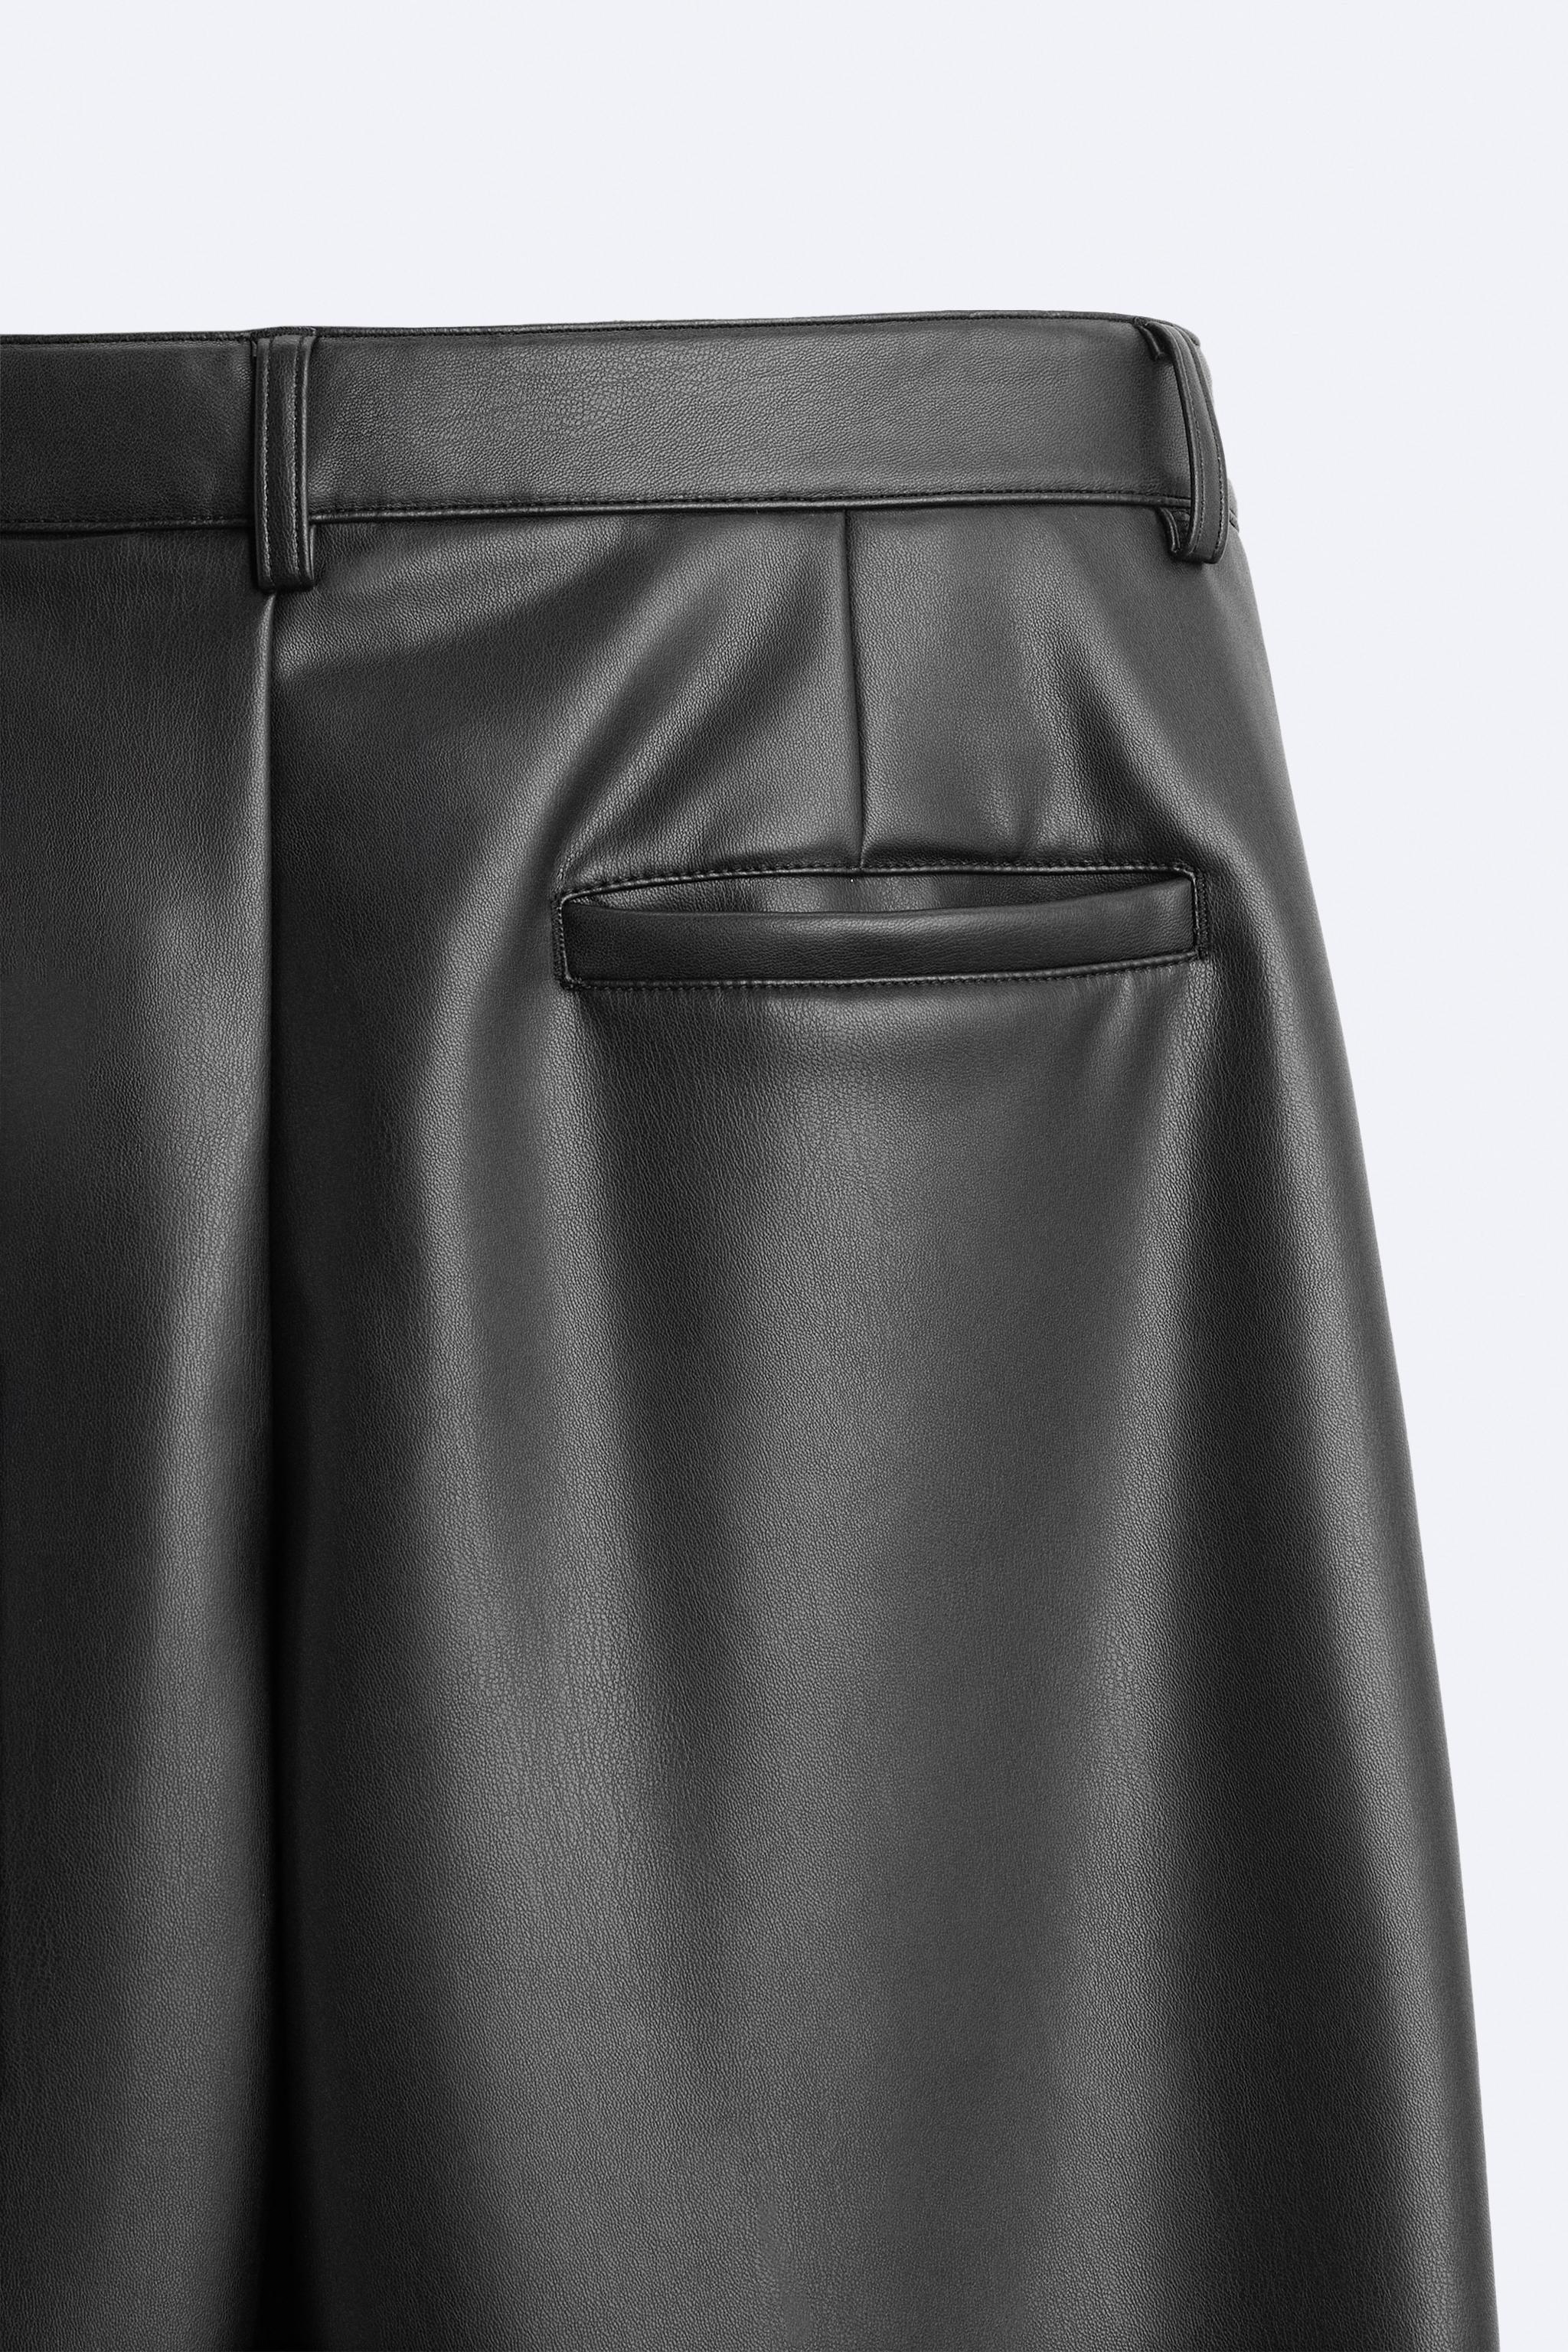 ZARA Snap Leather Pants for Women